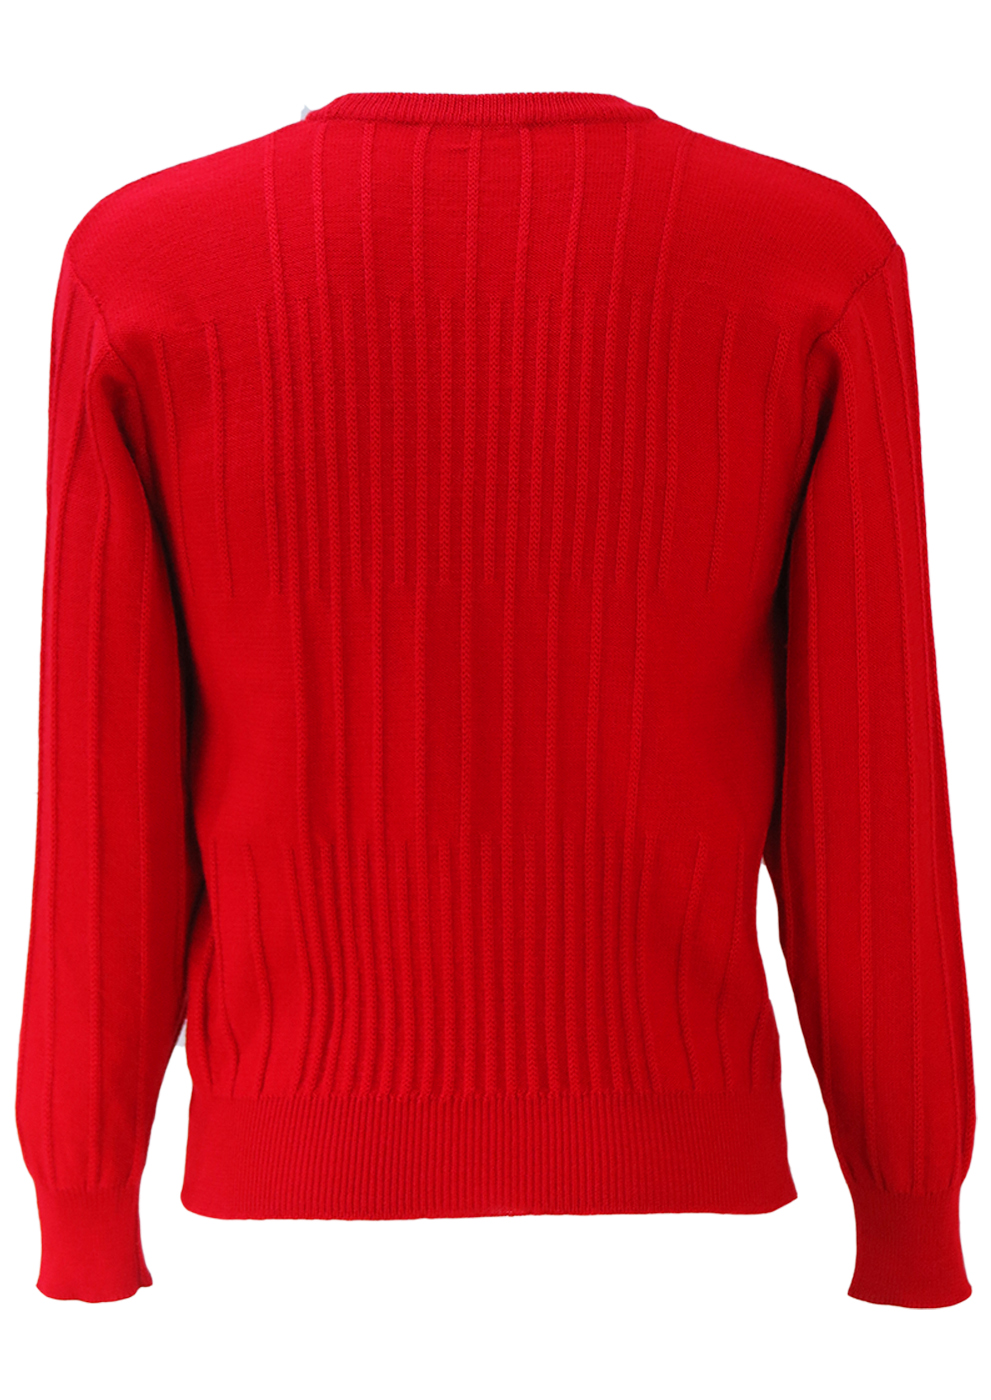 Fila Red Knit Jumper with Striped Knit Pattern & Sleeve Badge - S/M ...